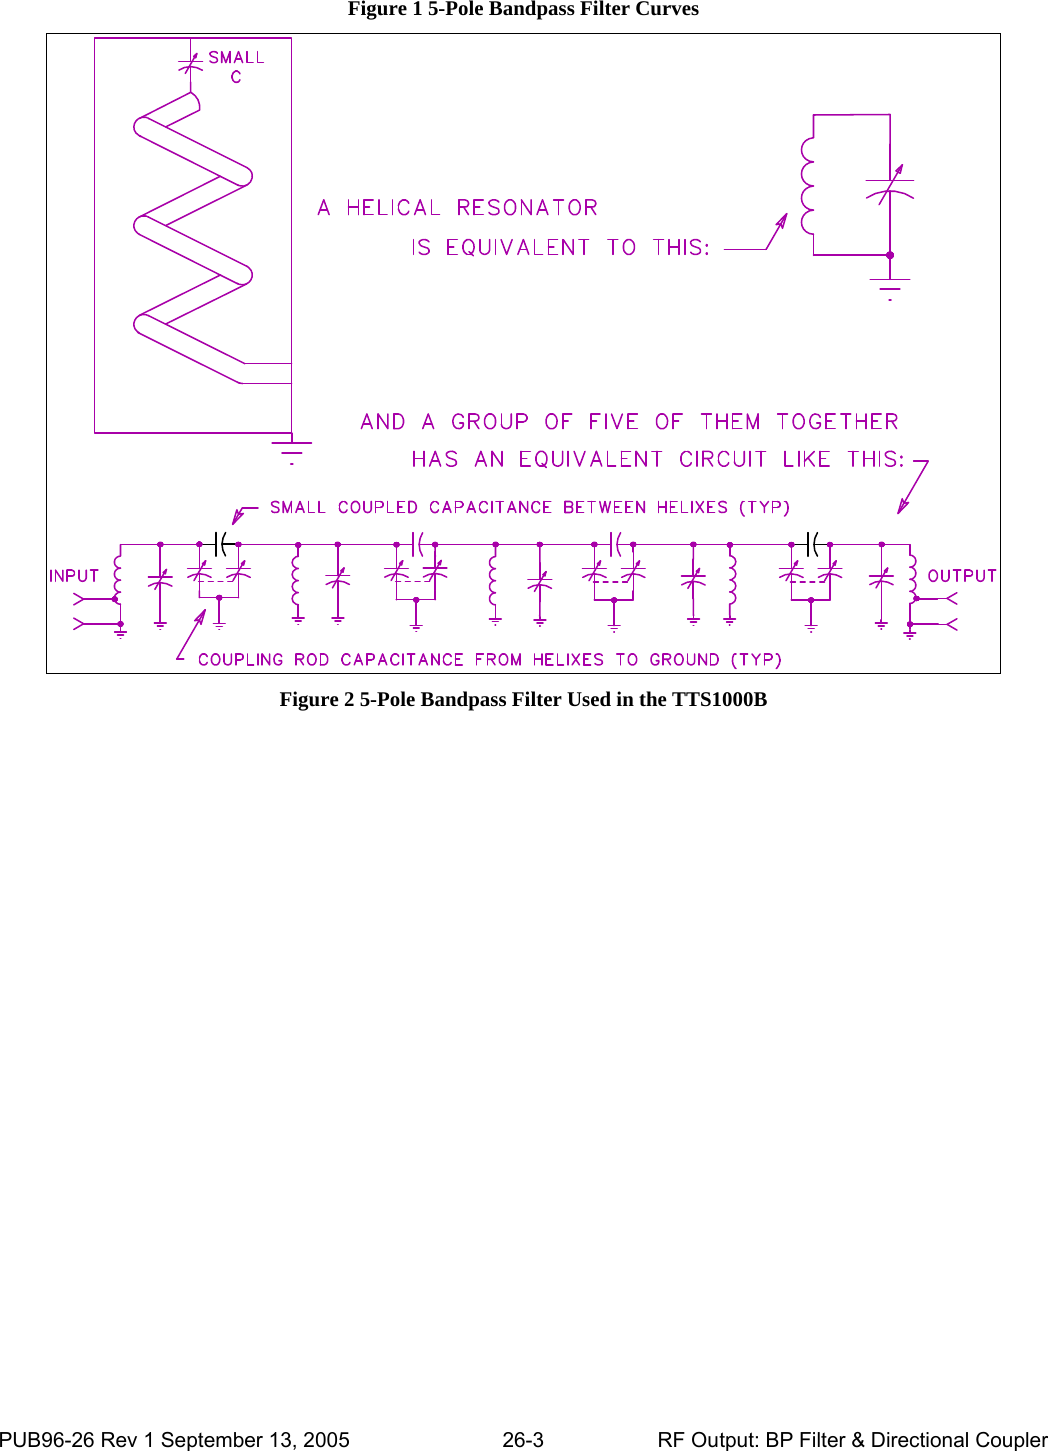 Figure 1 5-Pole Bandpass Filter Curves  Figure 2 5-Pole Bandpass Filter Used in the TTS1000B  PUB96-26 Rev 1 September 13, 2005  26-3  RF Output: BP Filter &amp; Directional Coupler 